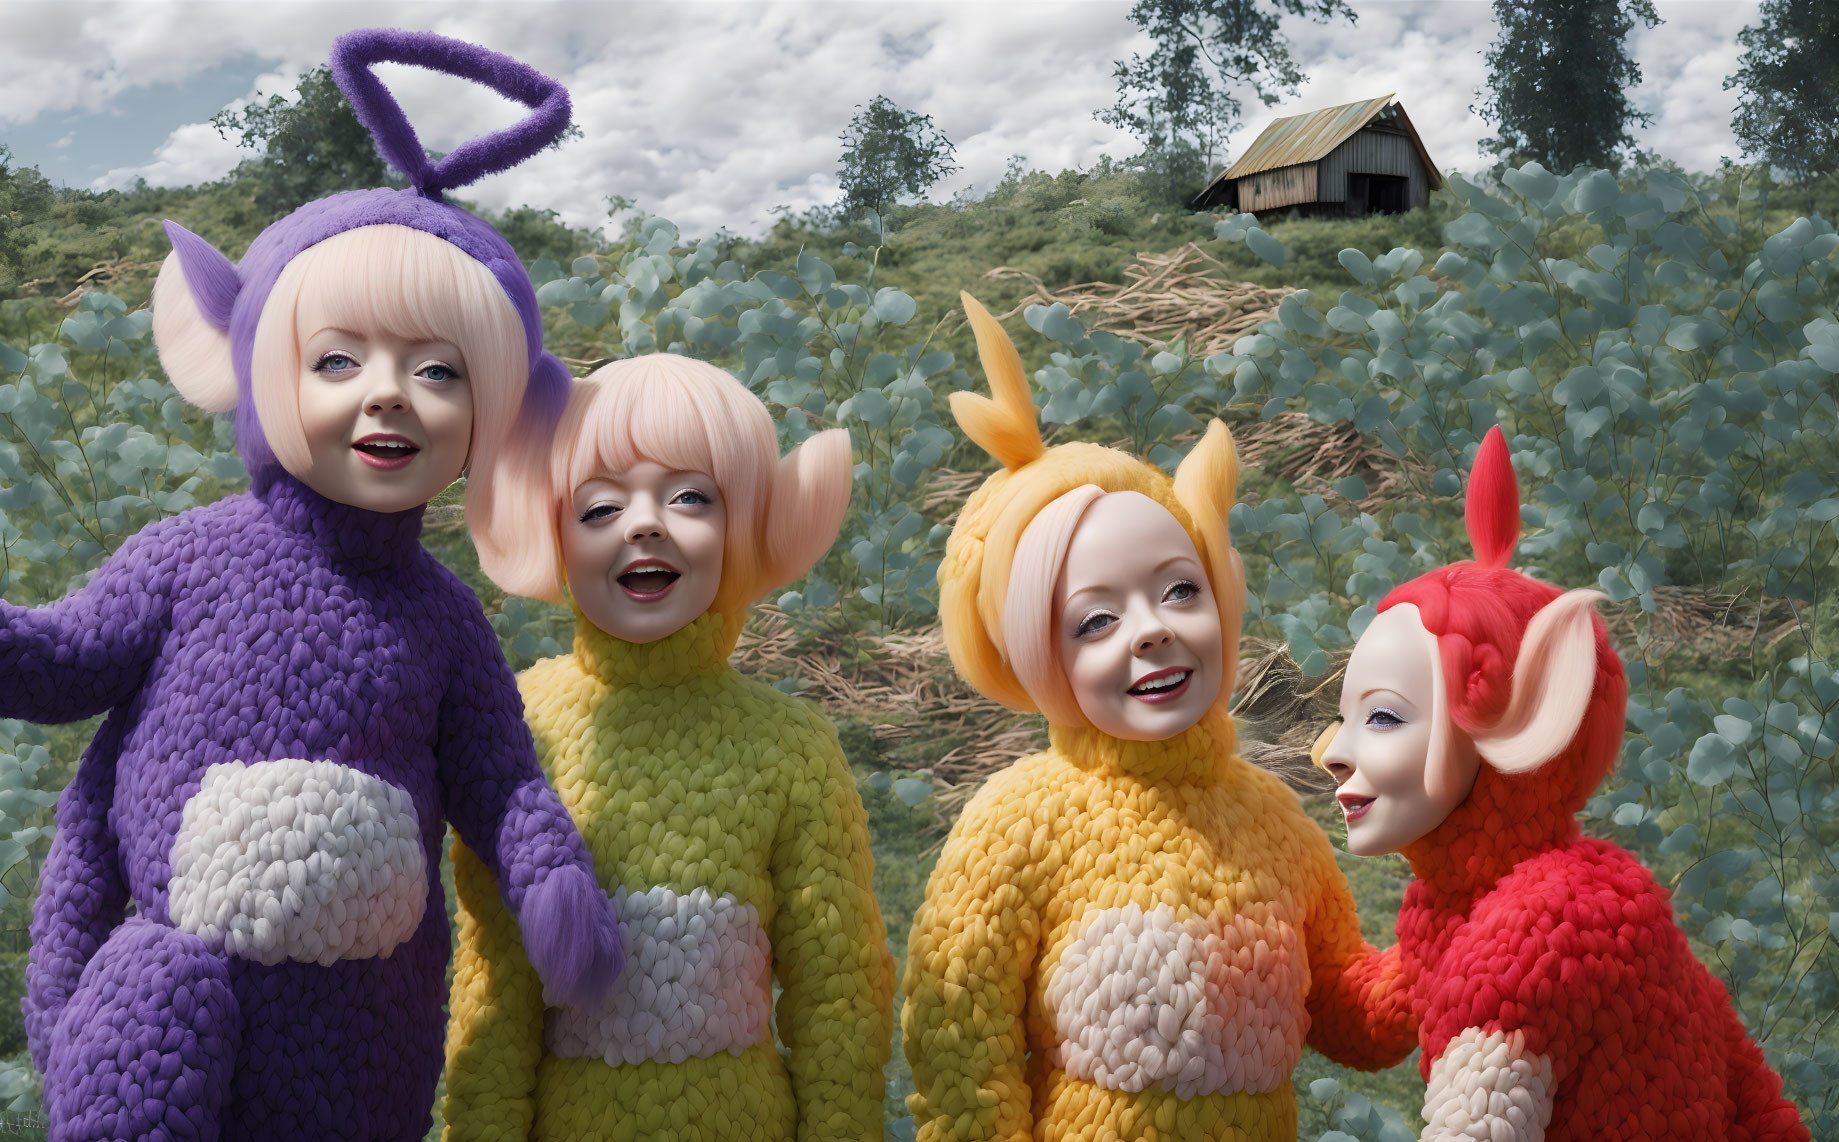 Vibrant elfin characters in fluffy costumes pose in countryside setting